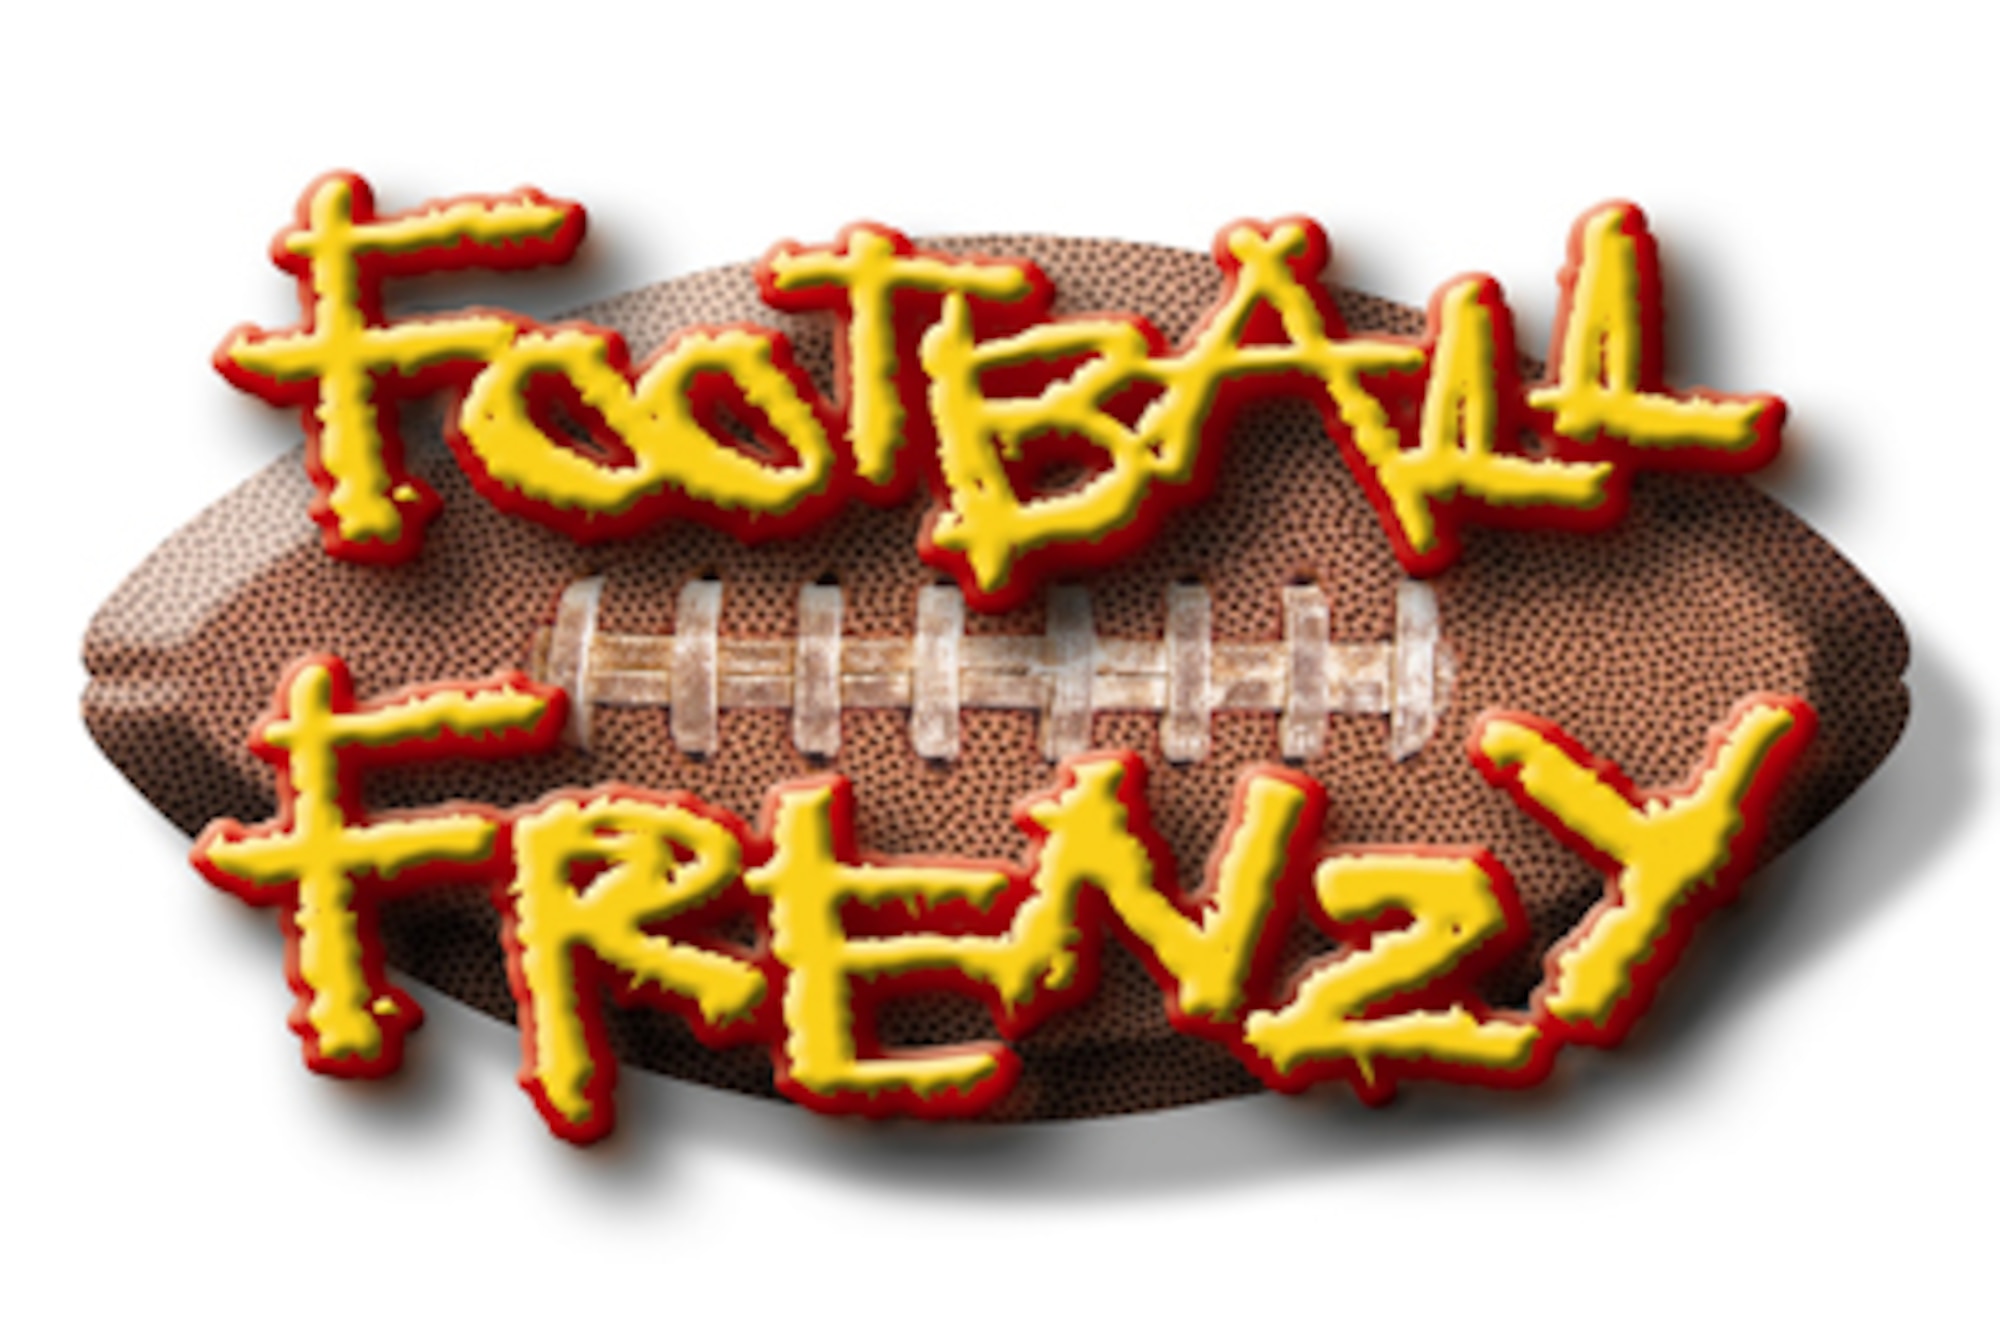 All Club members are eligible to attend the weekly regular season football games and enter to win Football Frenzy prizes, including tickets to games, the Super Bowl or gift cards. (U.S. Air Force courtesy graphic)